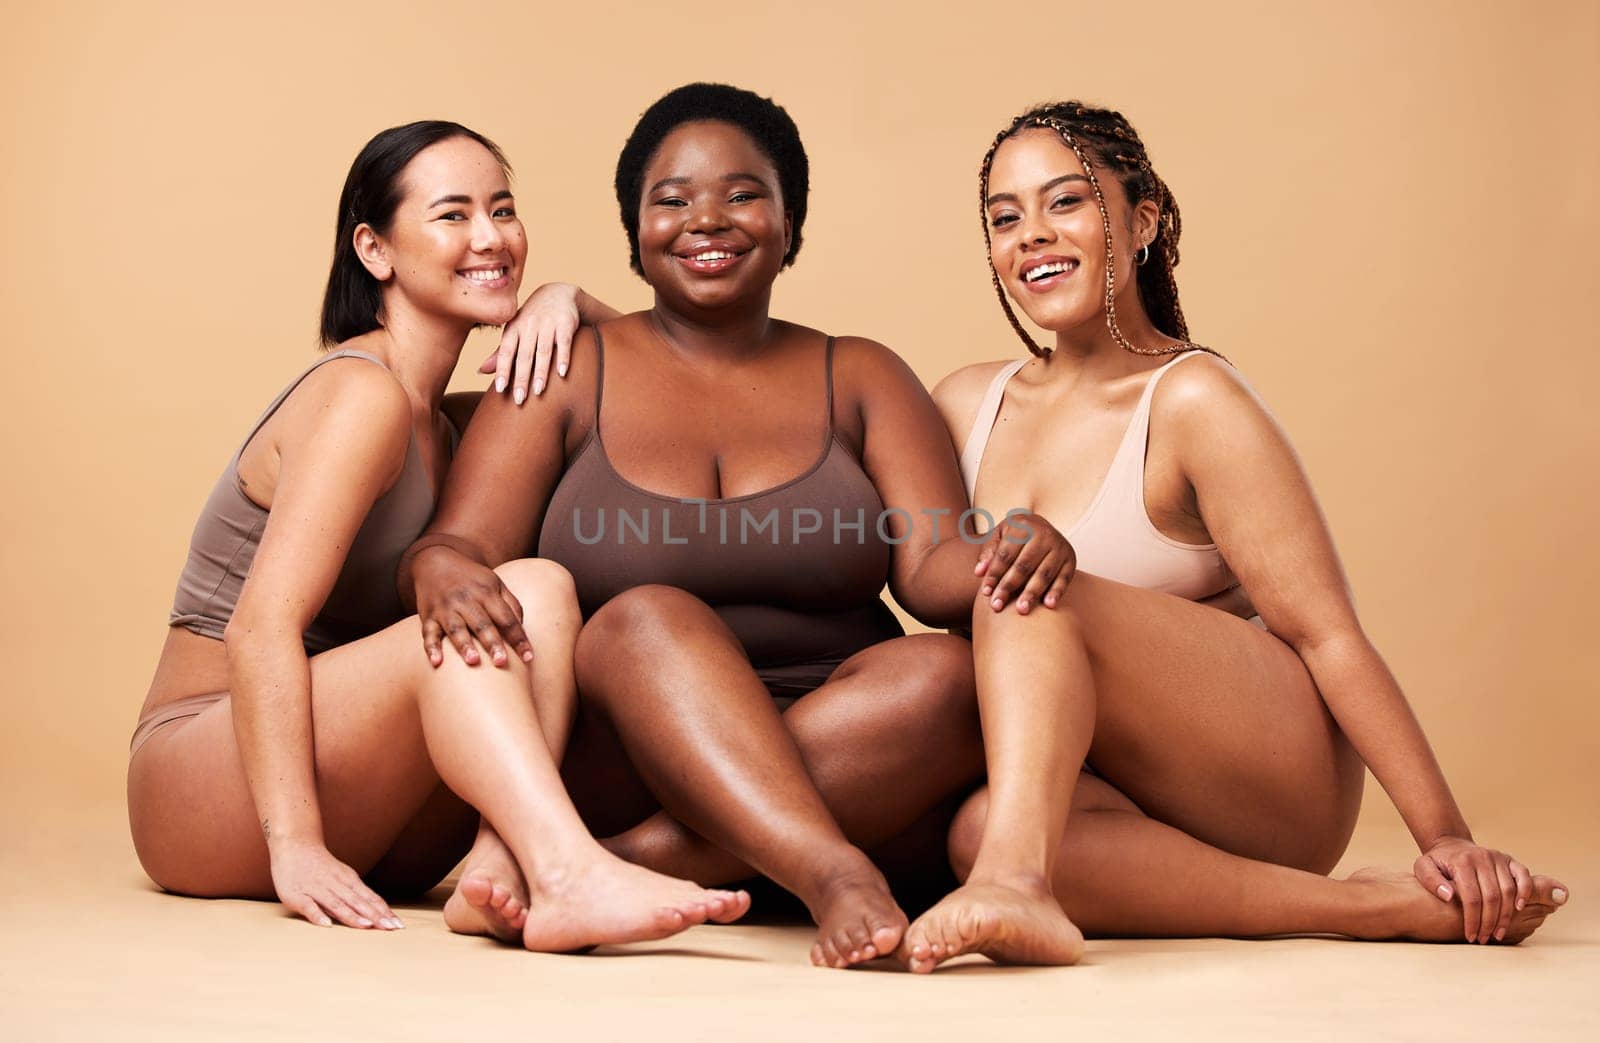 Diversity, women friends and body portrait with skin glow group together for inclusion, beauty and power. Underwear model people on beige background with a smile, pride and motivation for self love.